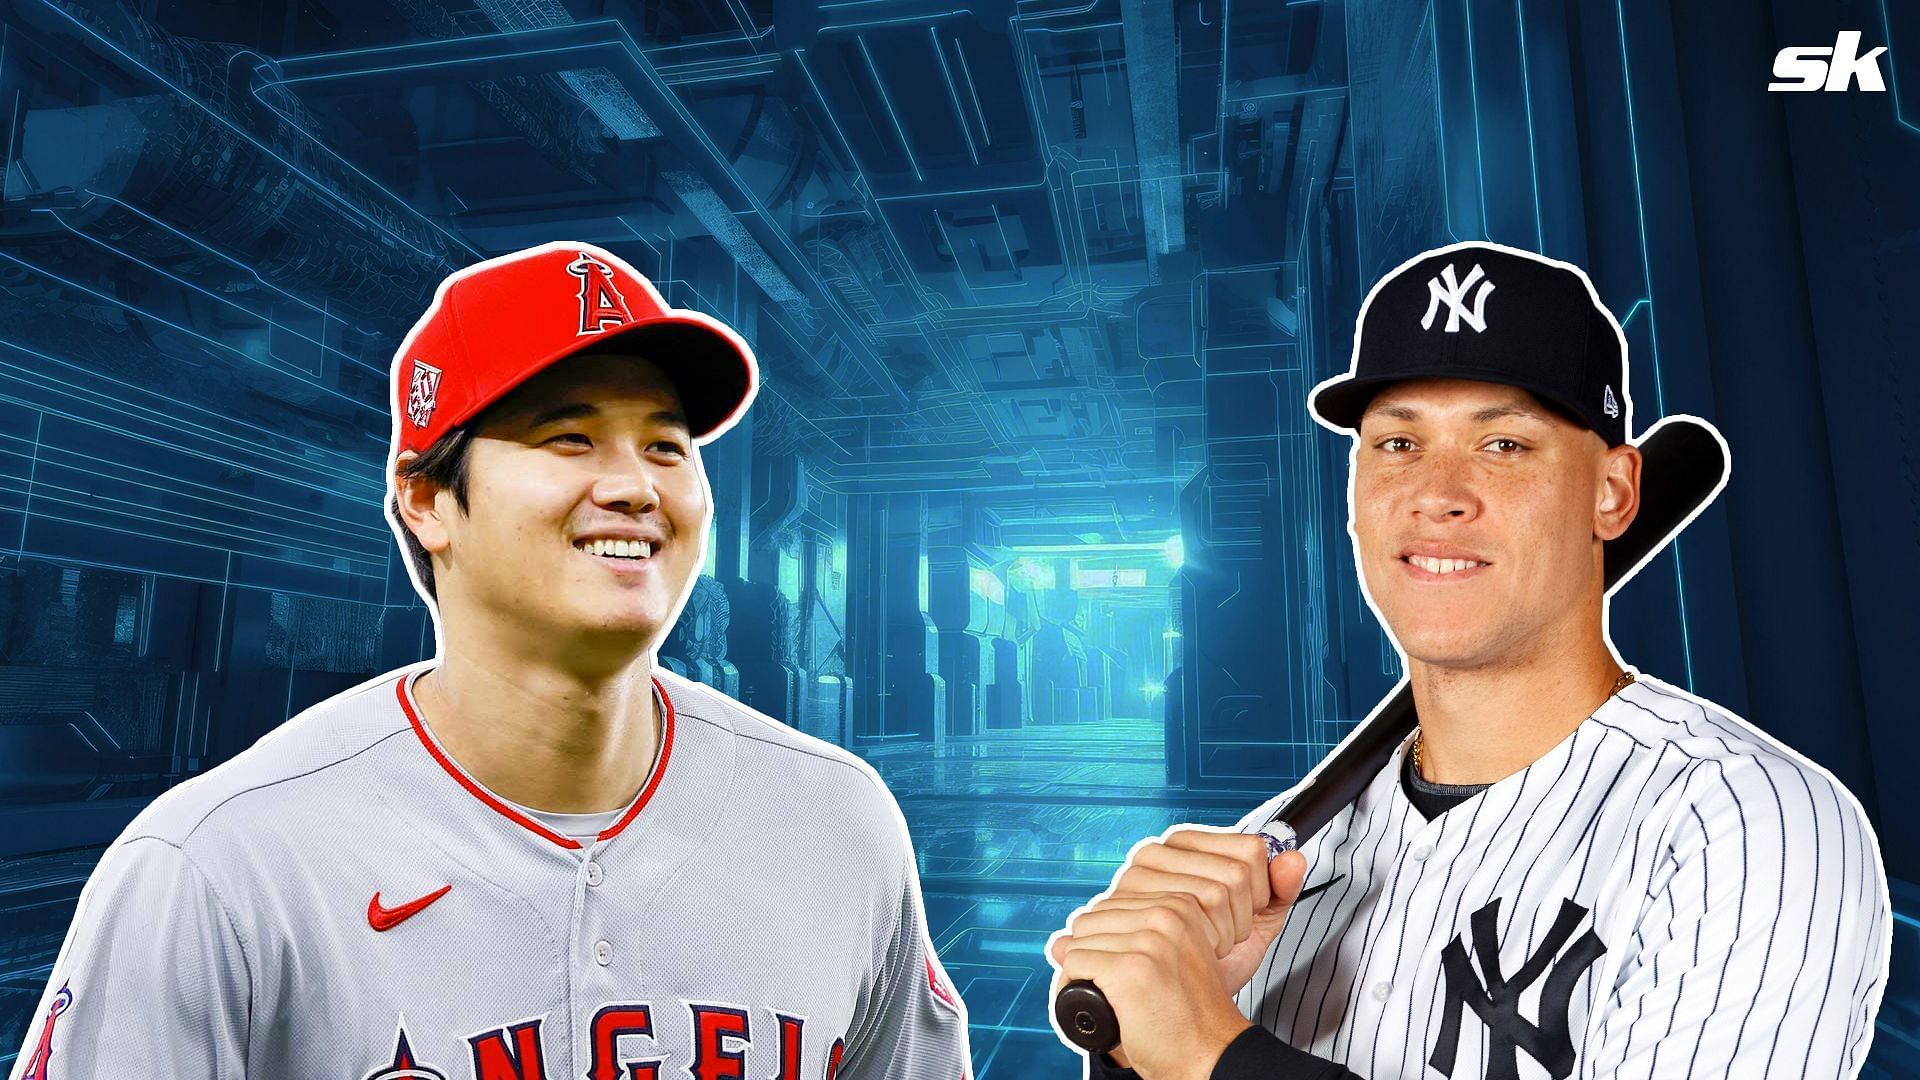 We asked AI to decide if Shohei Ohtani or Aaron Judge was the better hitter